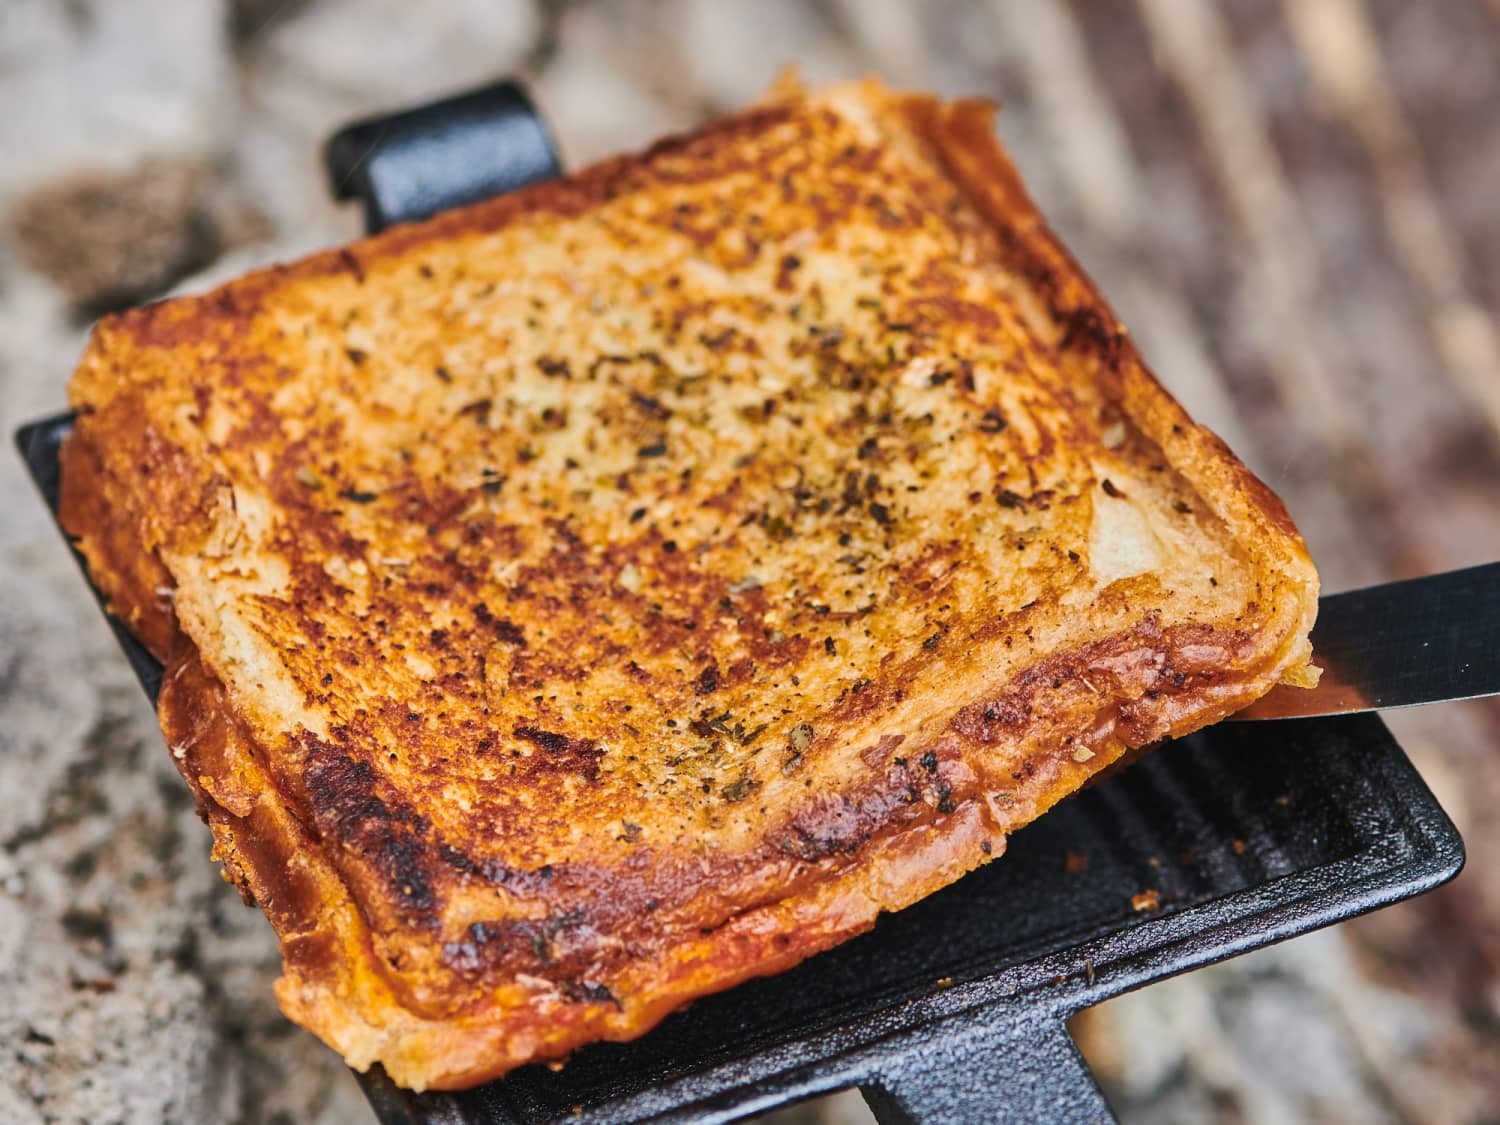 Campfire Grilled Cheese Sandwiches - Pie Iron or Griddle